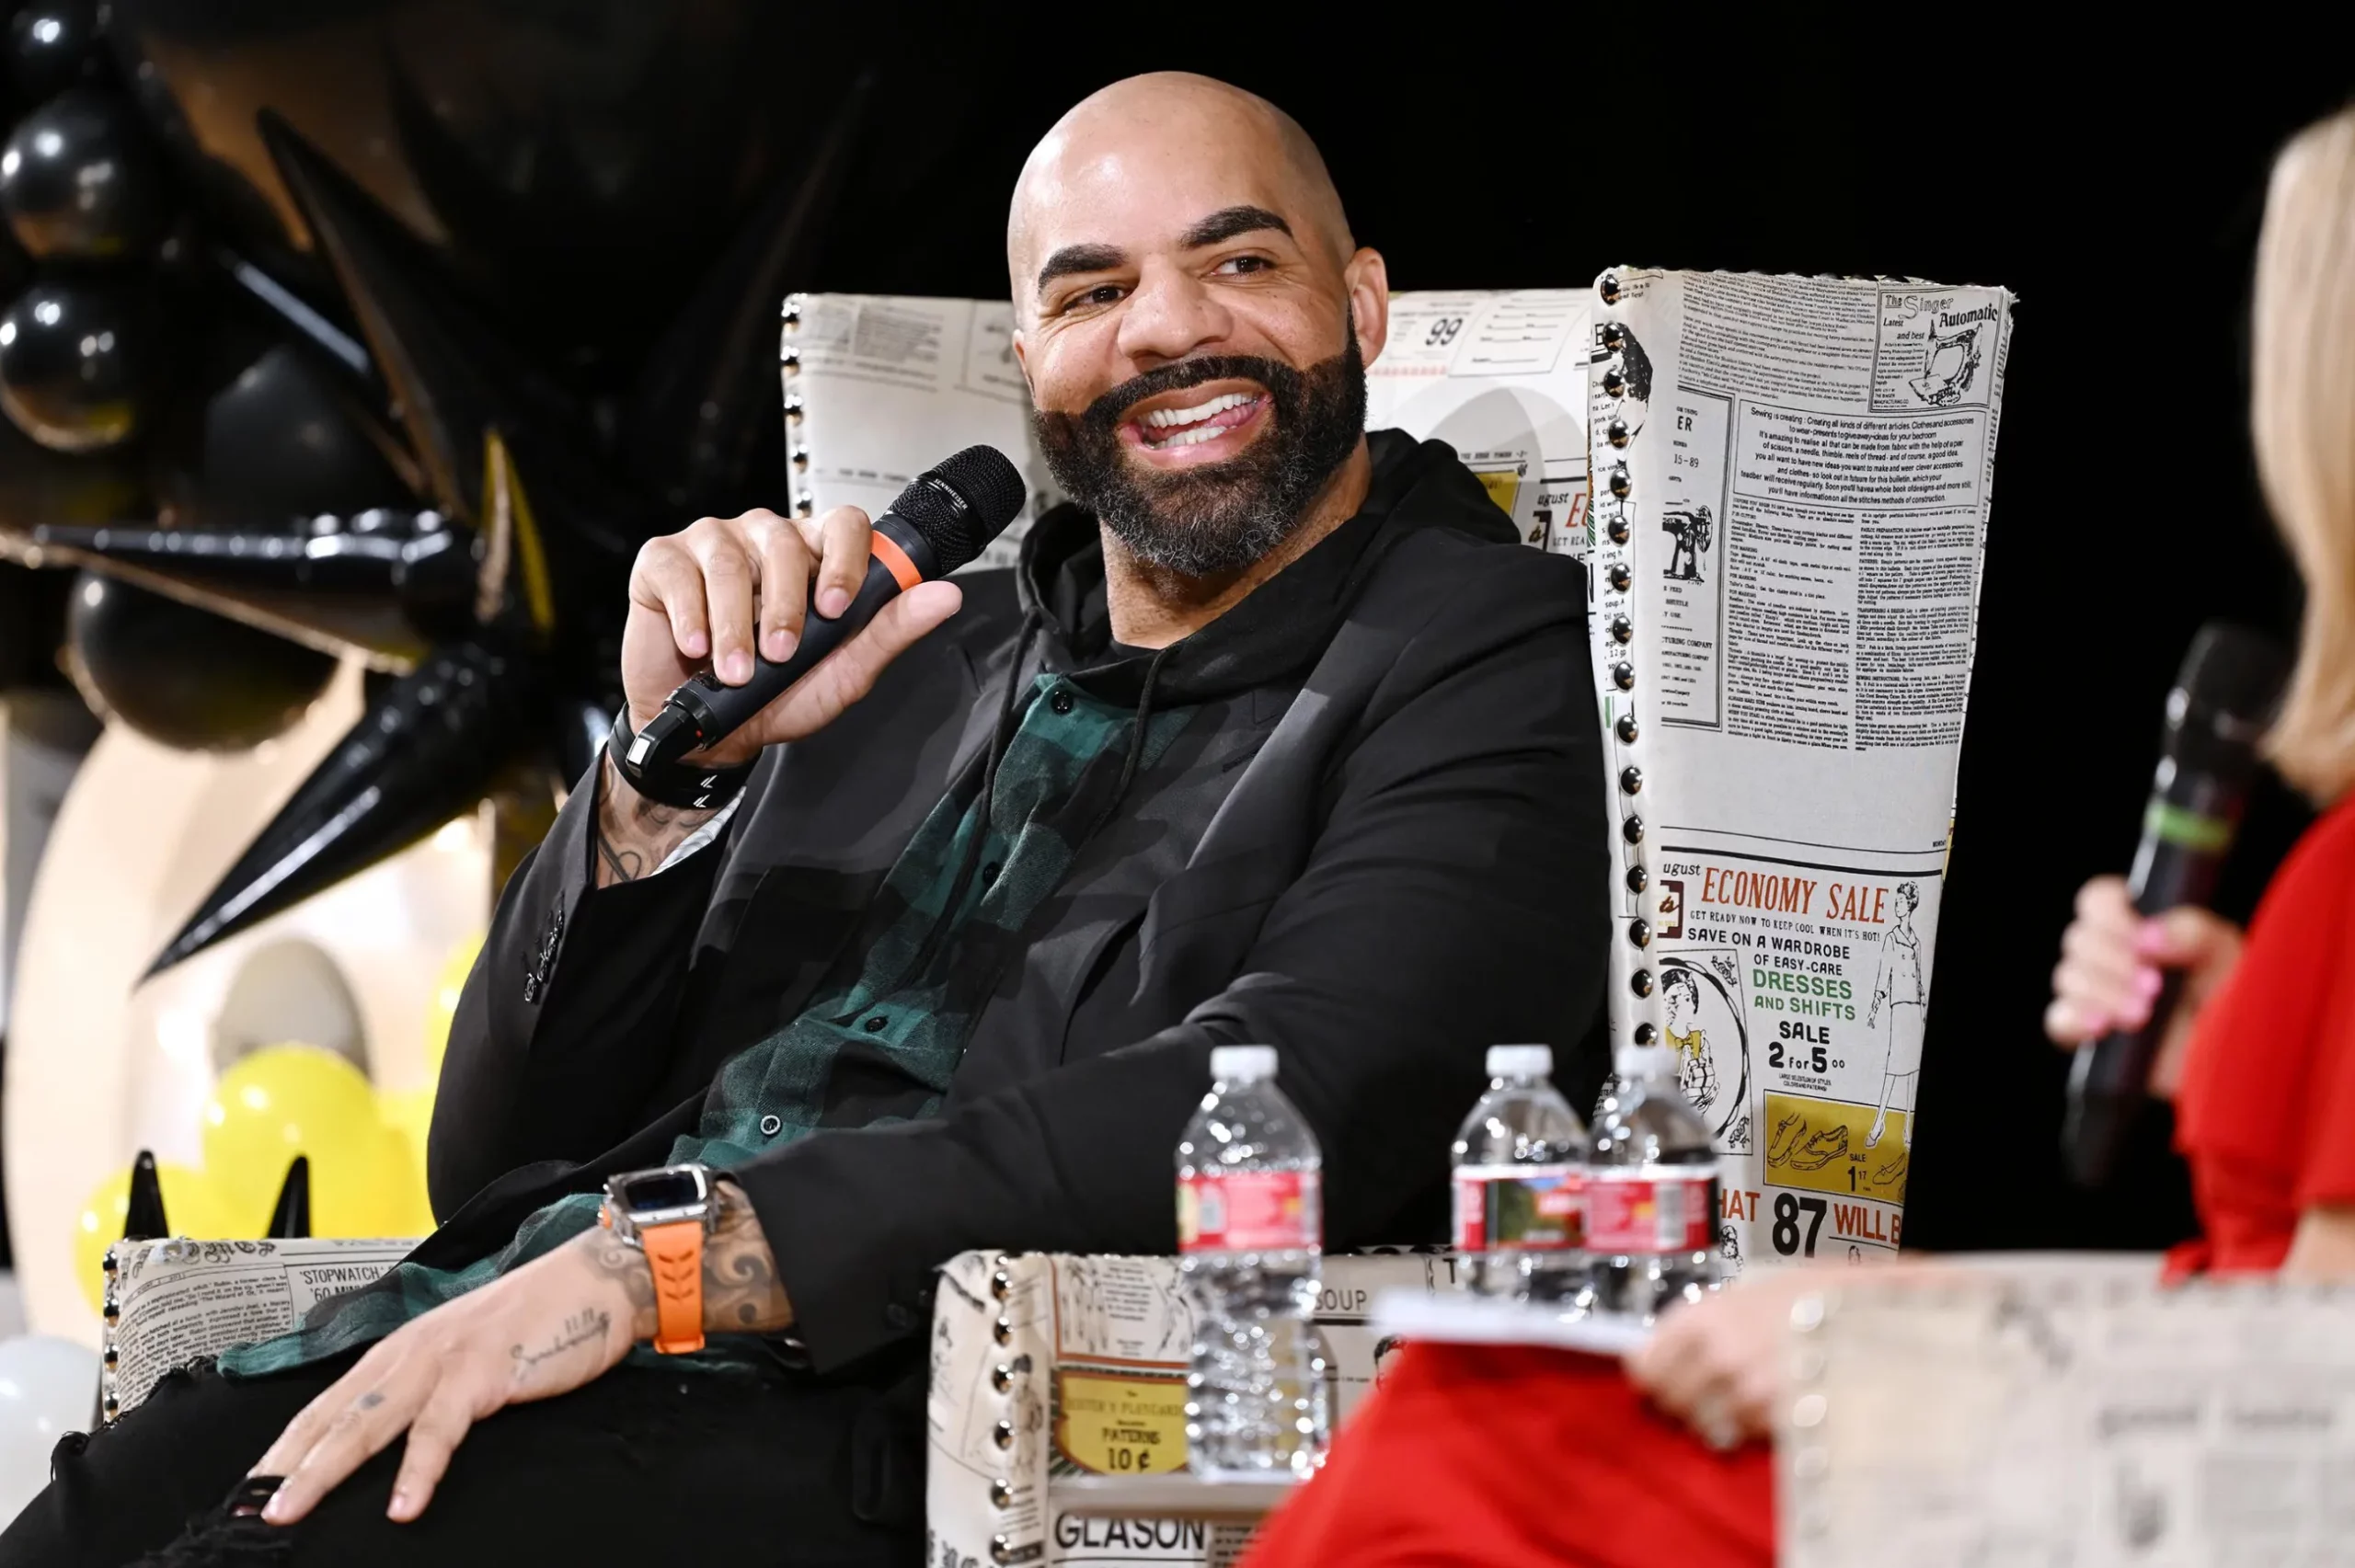 Former Jazz star Carlos Boozer charms, inspires Utah audience during speaking appearance at ‘Voices’ event